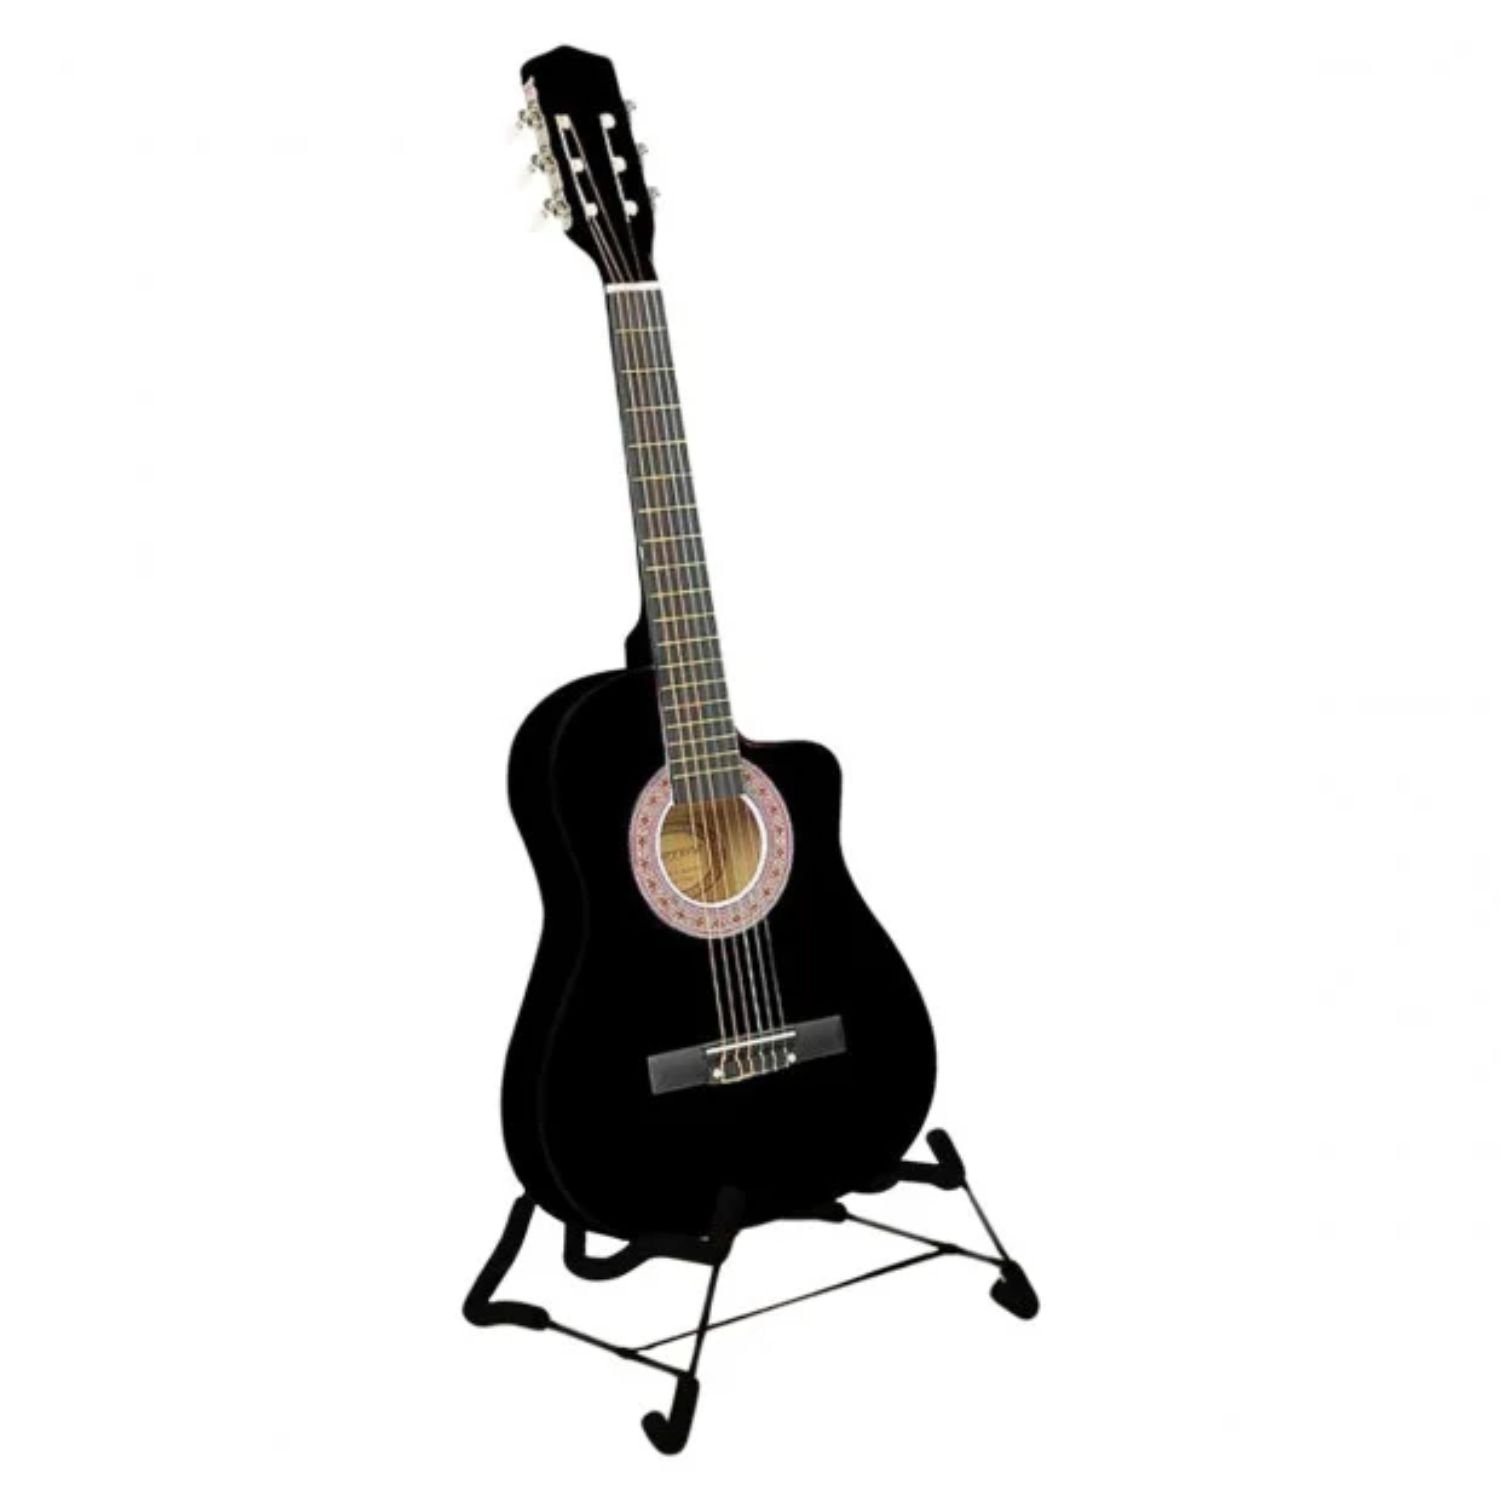 Karrera 38in Pro Cutaway Acoustic Guitar with Carry Bag - Black 1